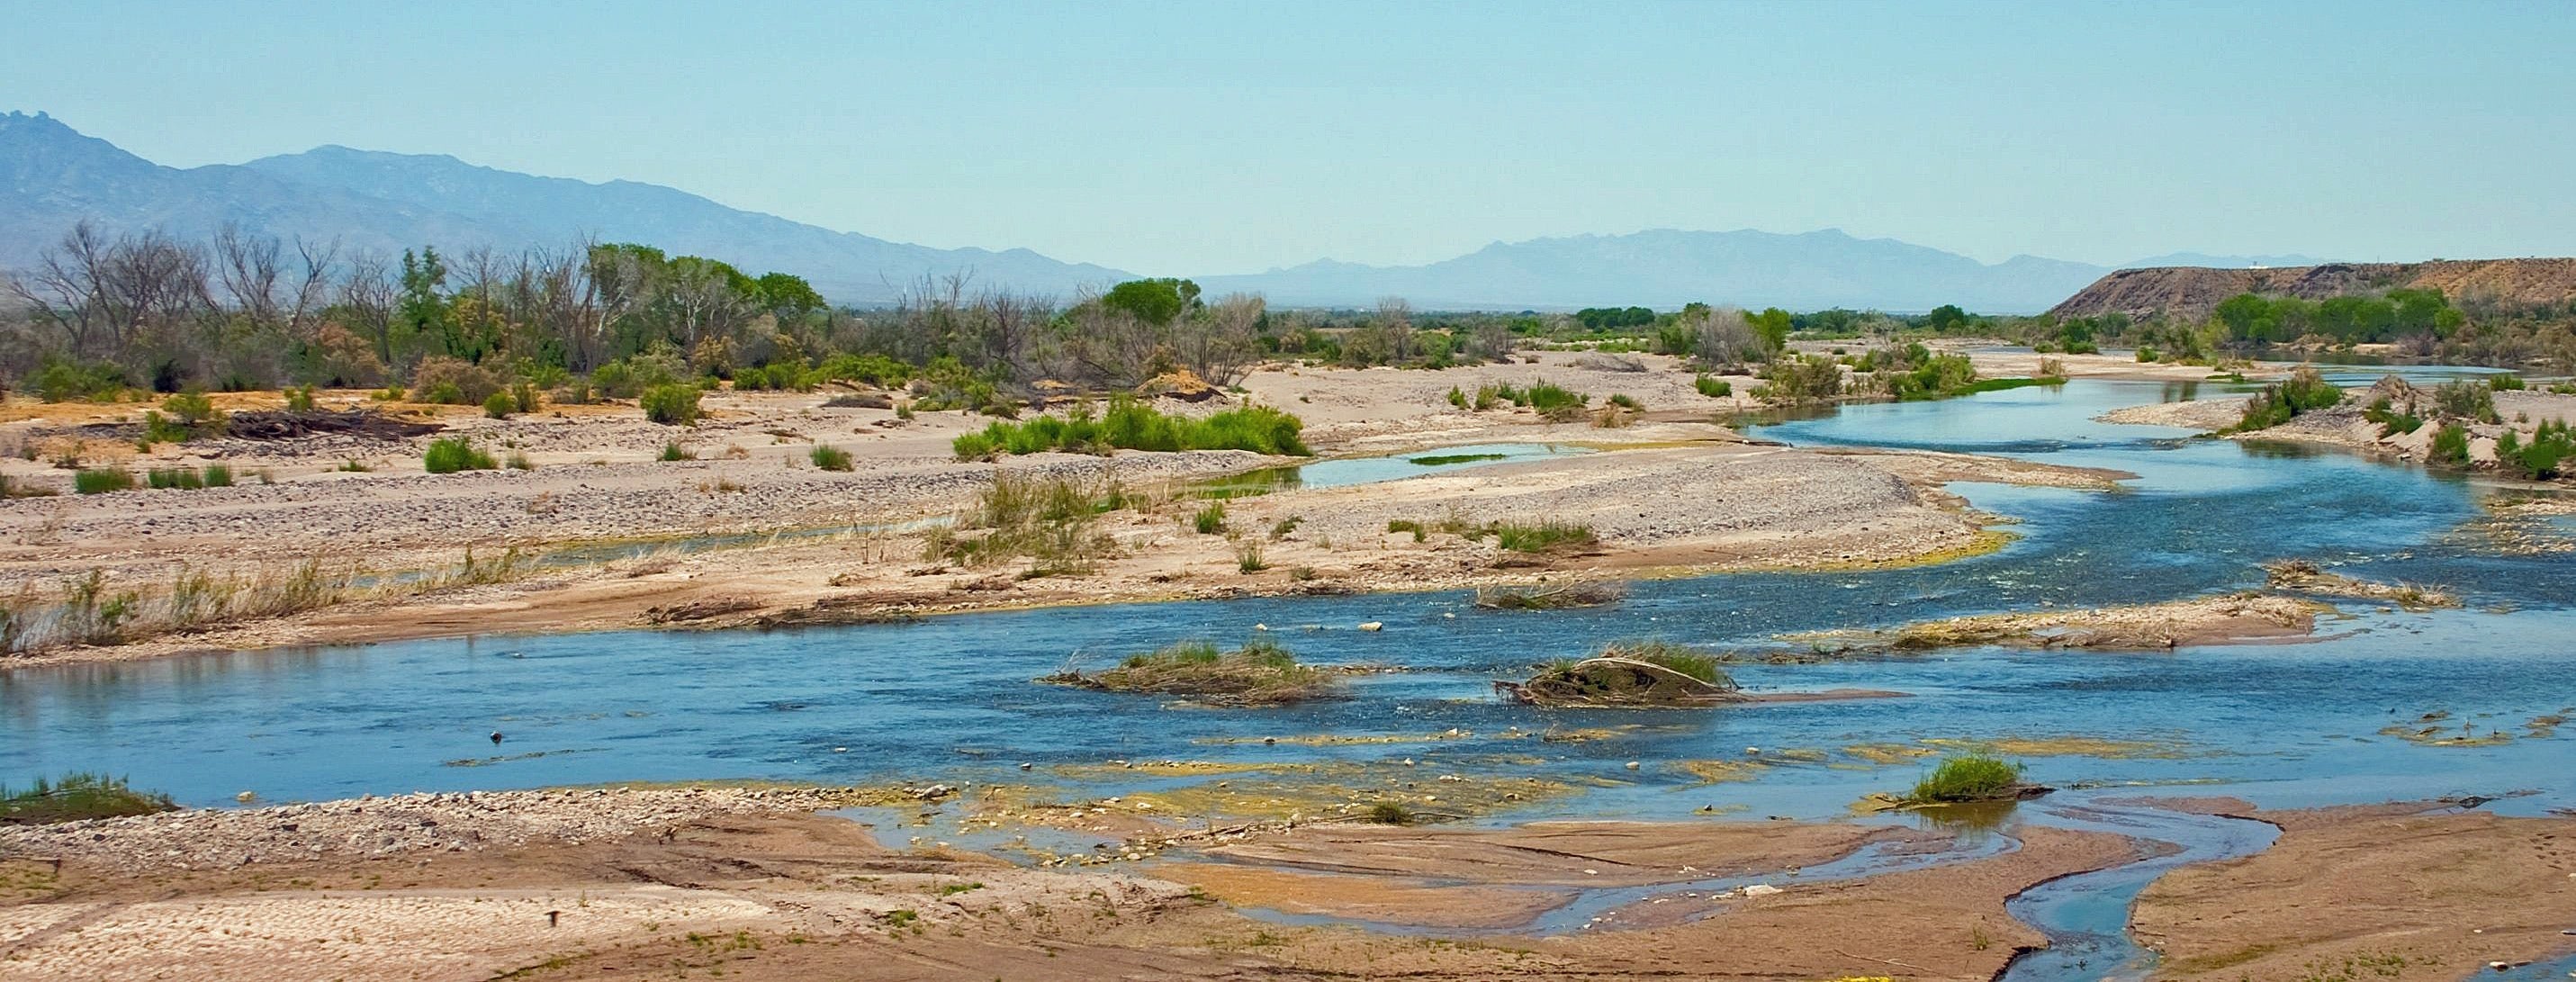 A sprawling view of the gila river and wild plantlife